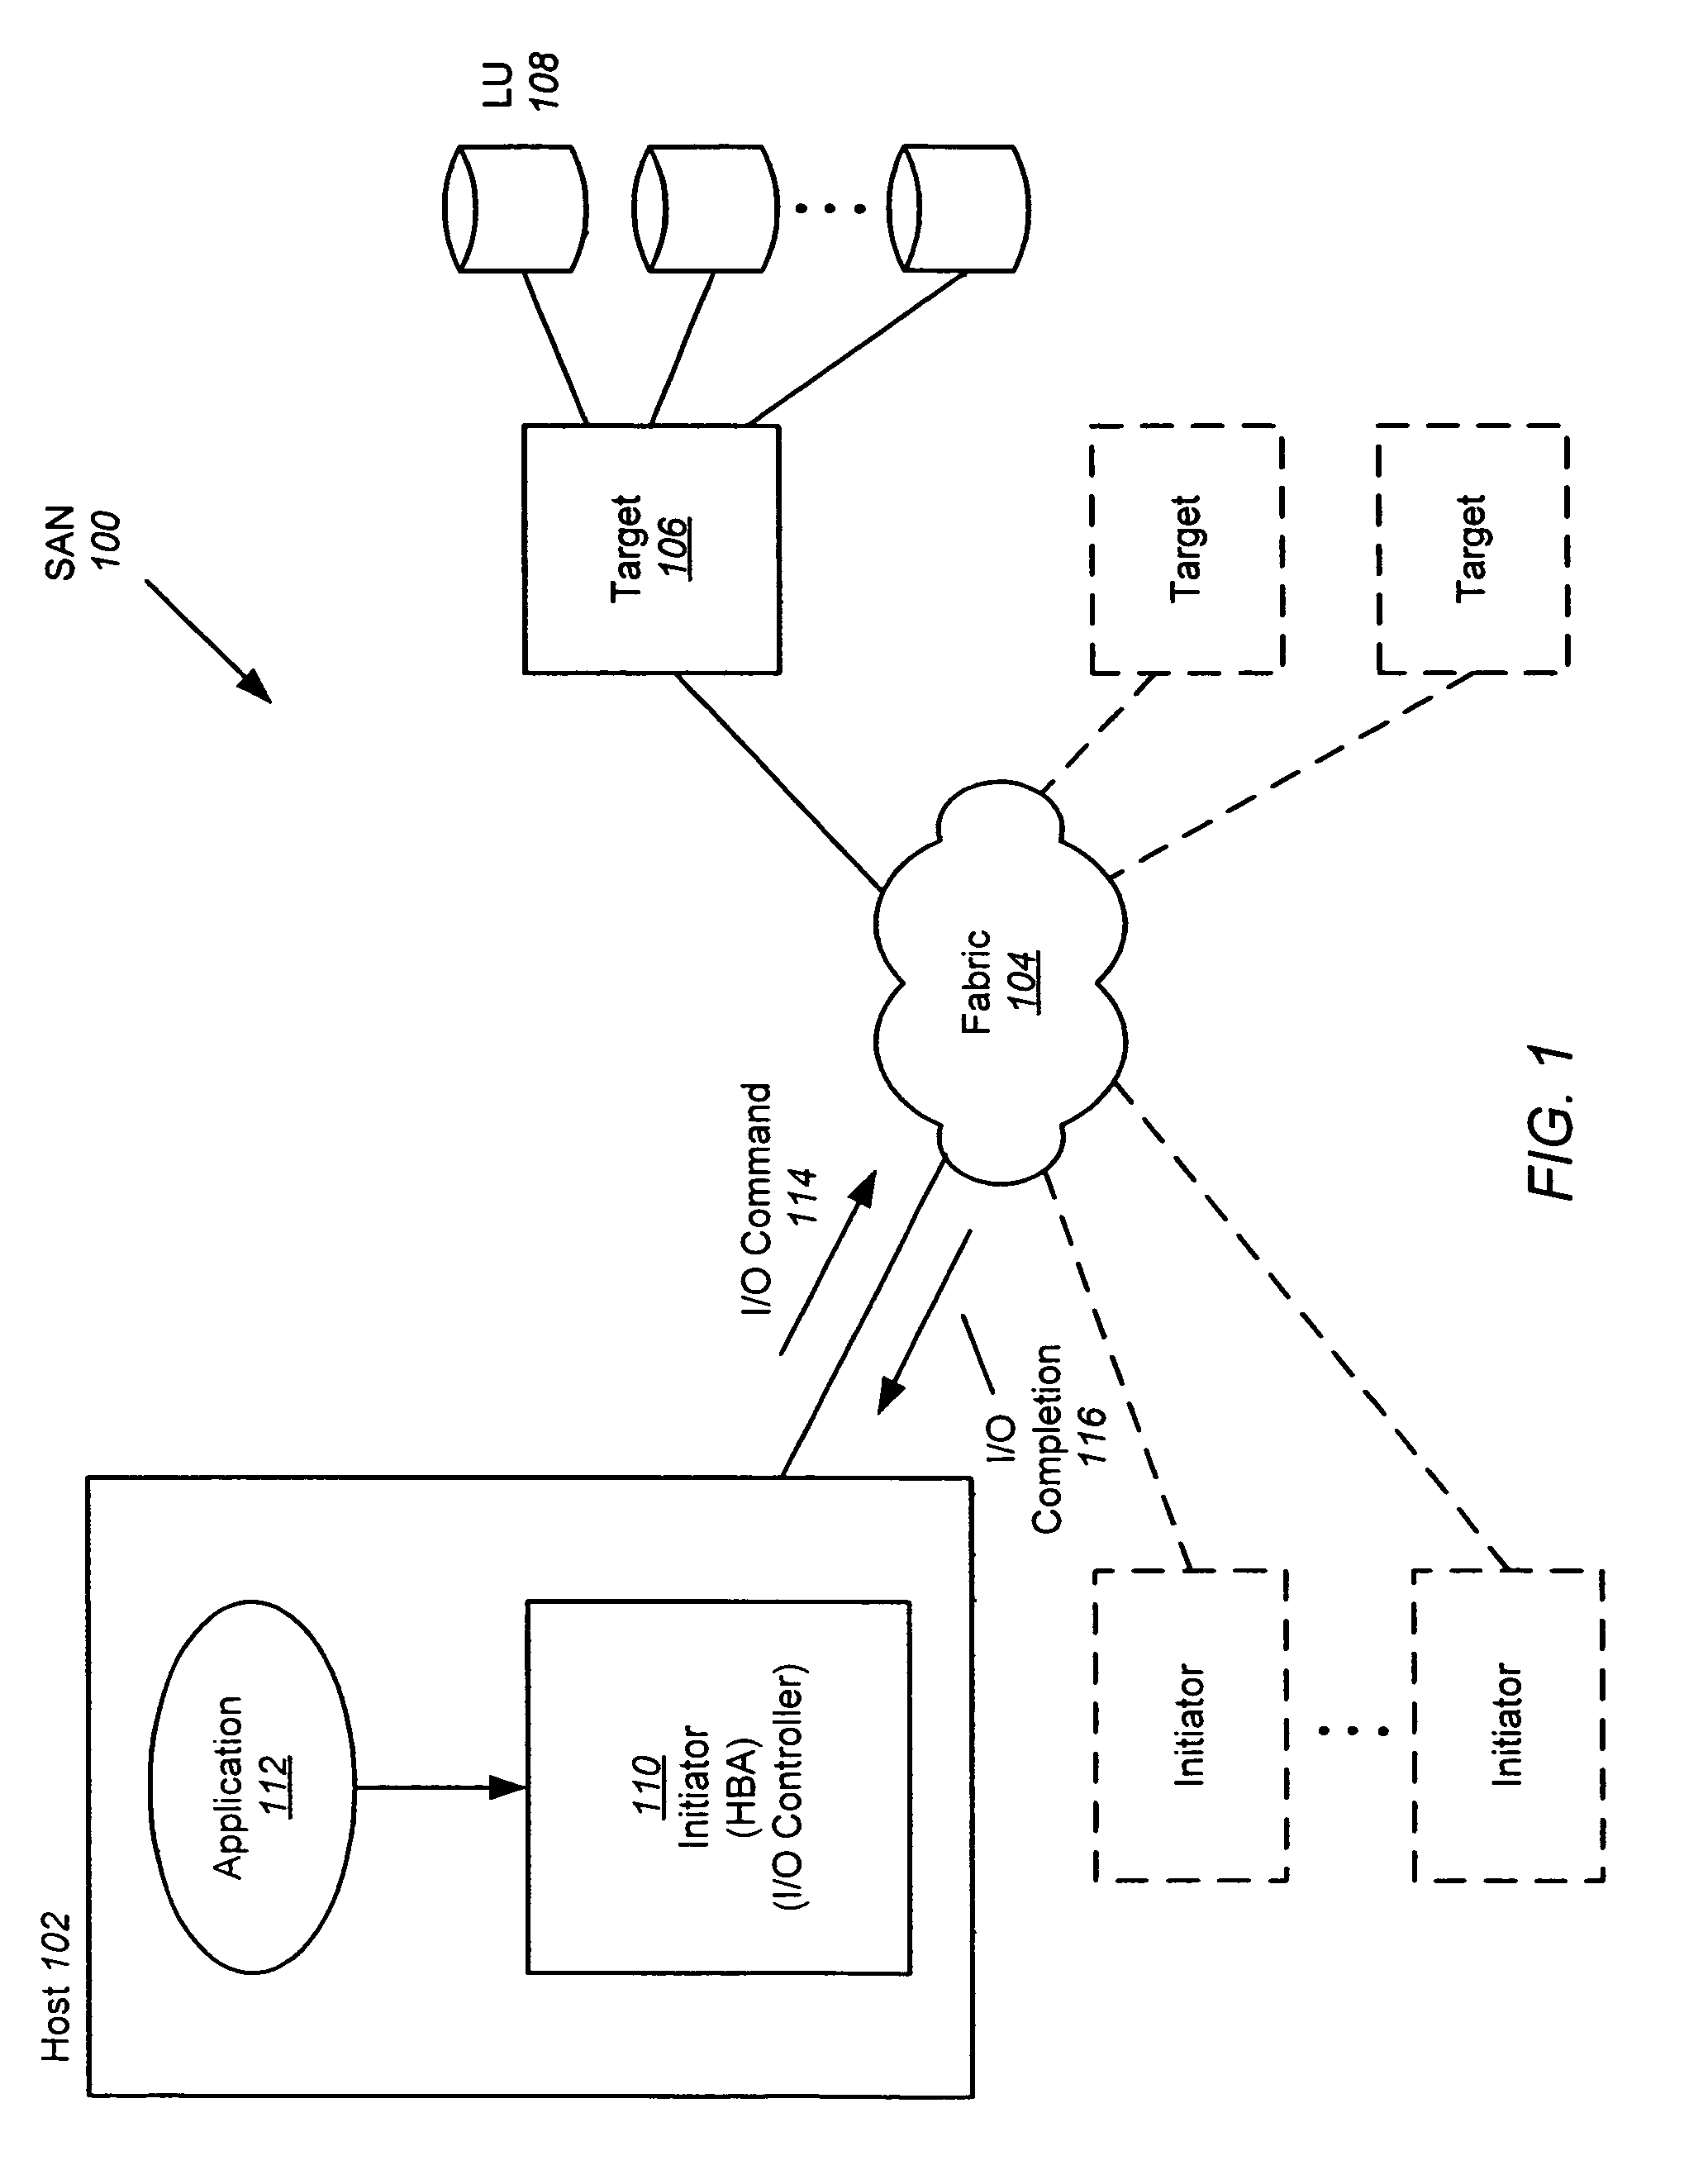 Method for tracking and storing time to complete and average completion time for storage area network I/O commands